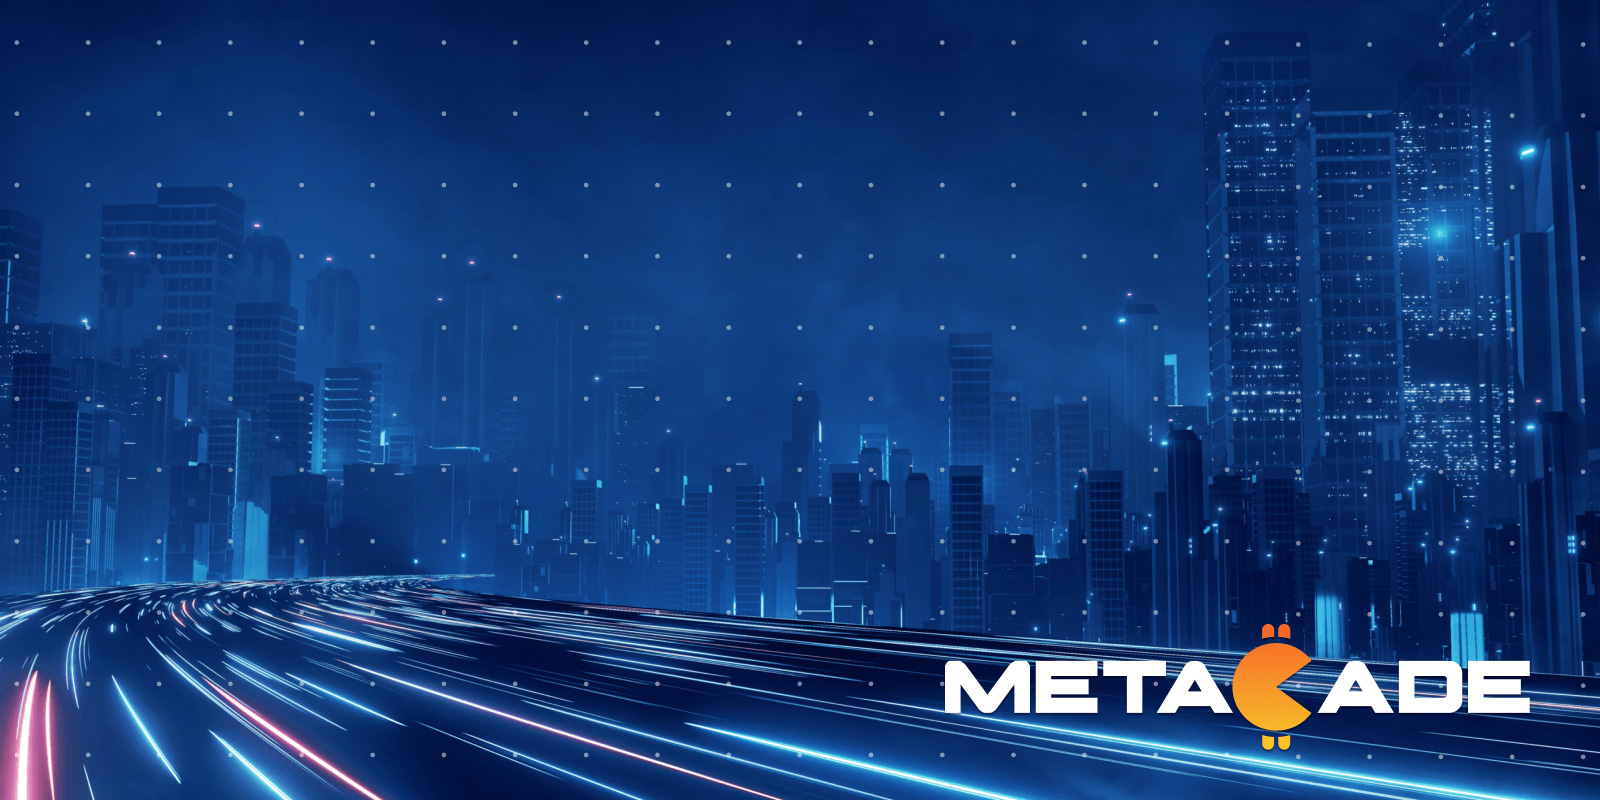 Here's How Metacade (MCADE) Will Outpace Apecoin in 2023